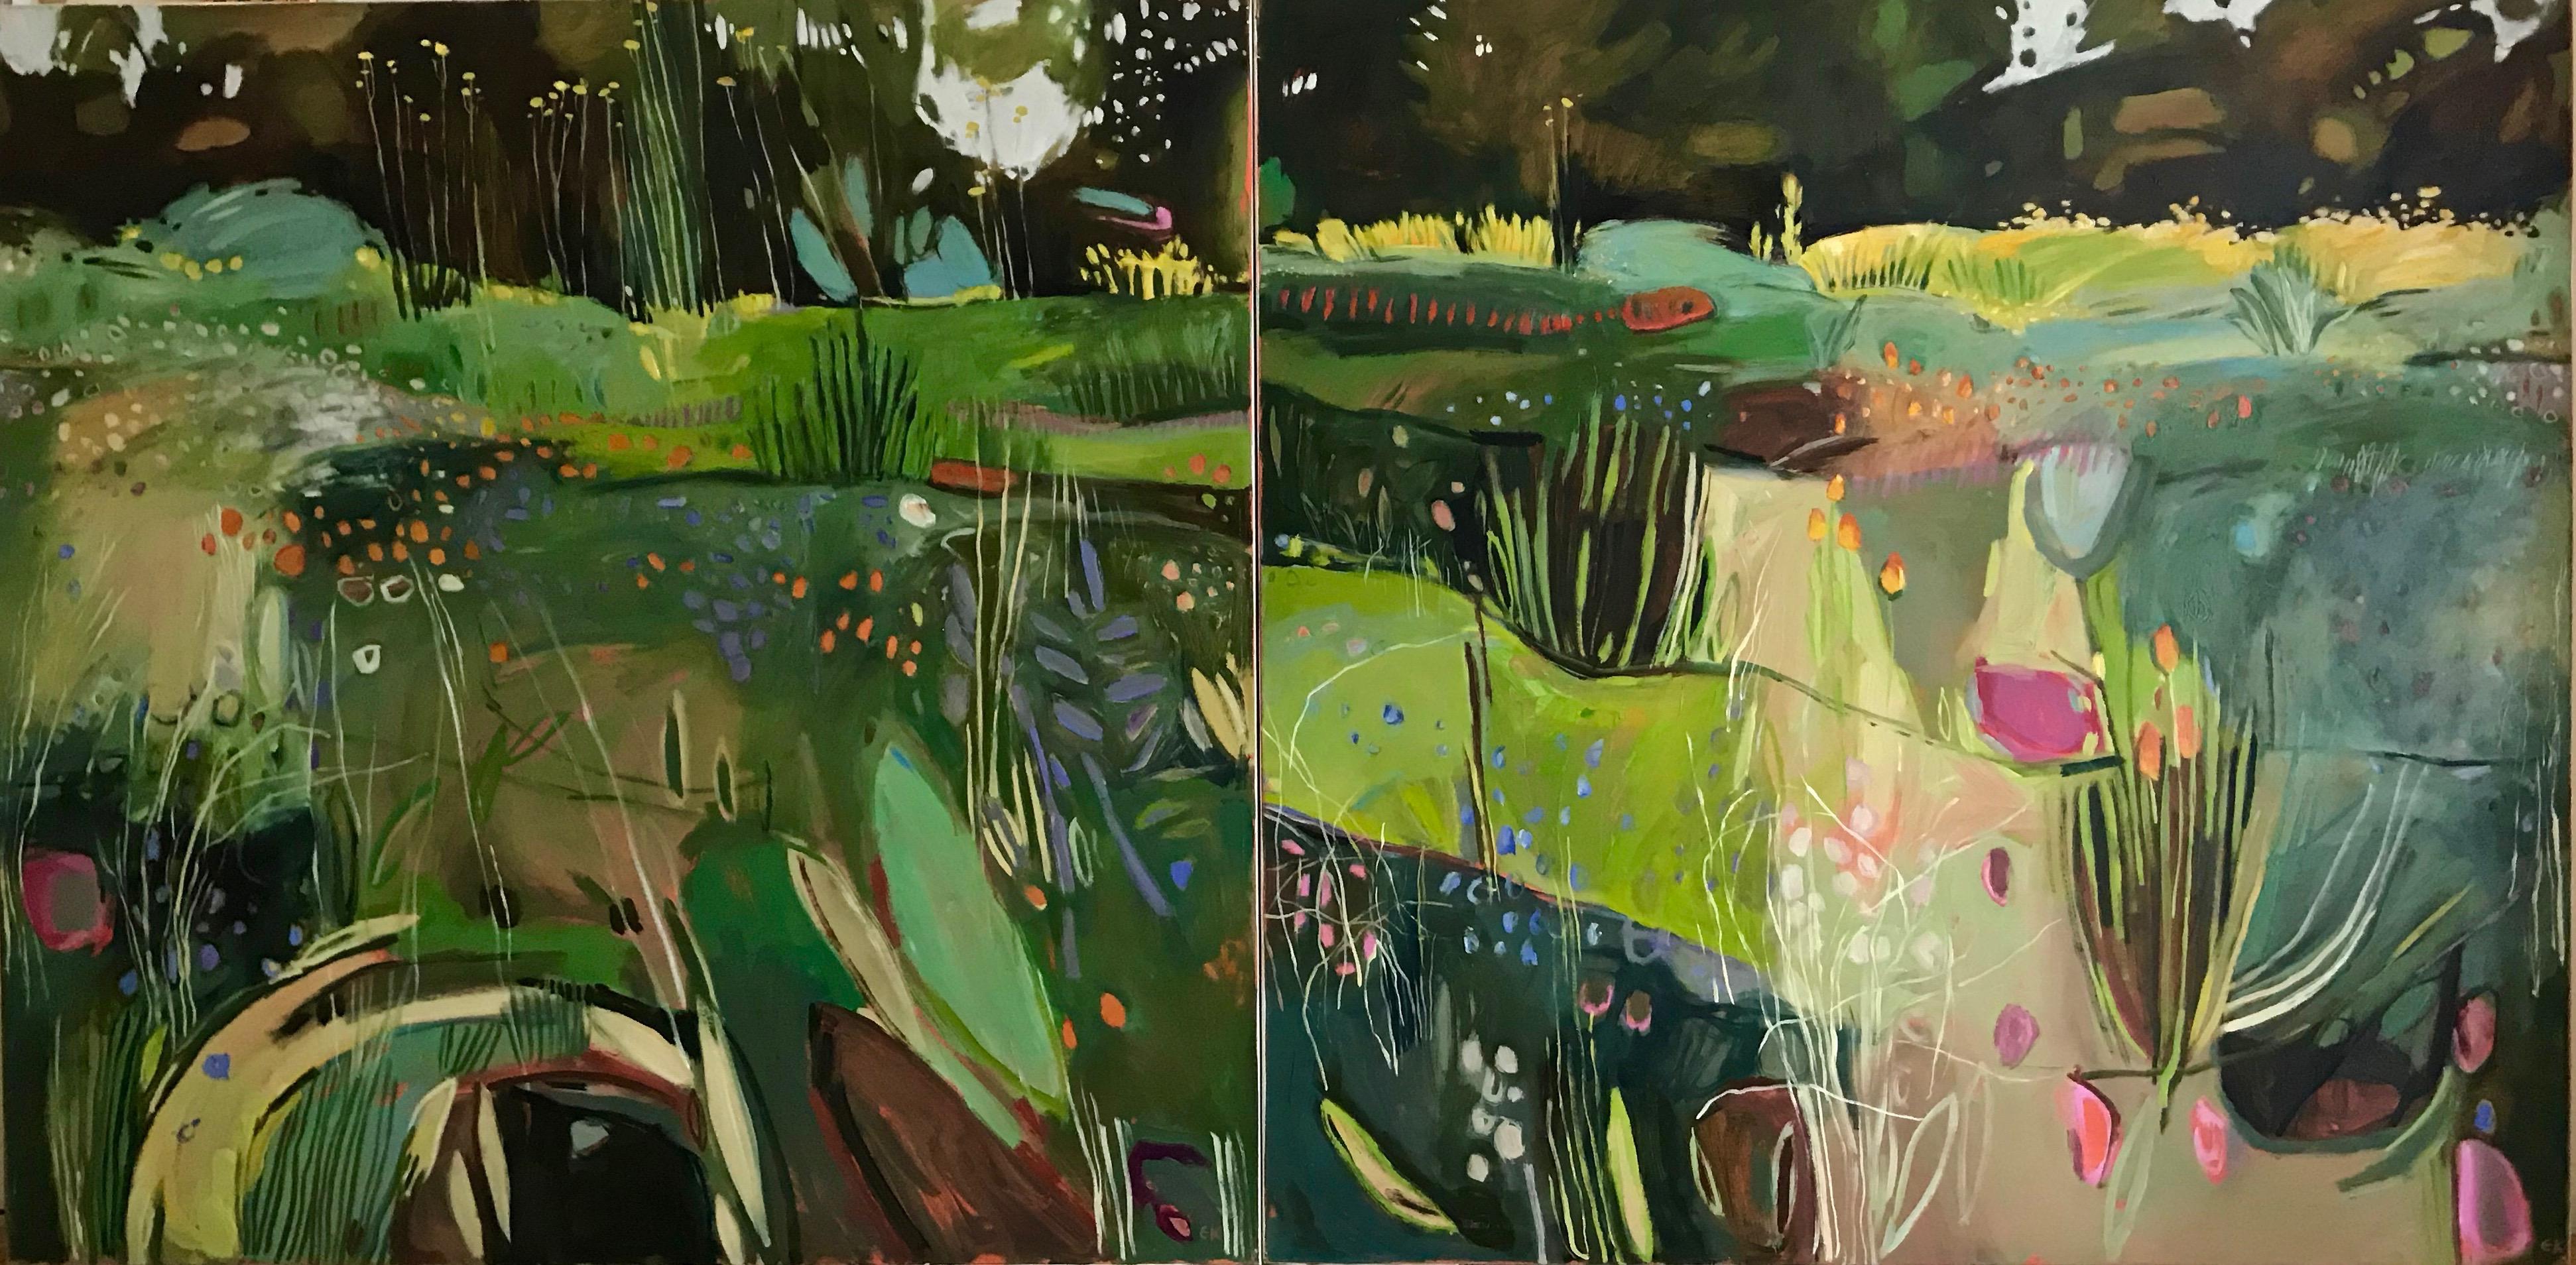 Elaine Kazimierczuk Abstract Painting - Diptych: Merton Borders at the Oxford Botanic Gardens, large abstract painting